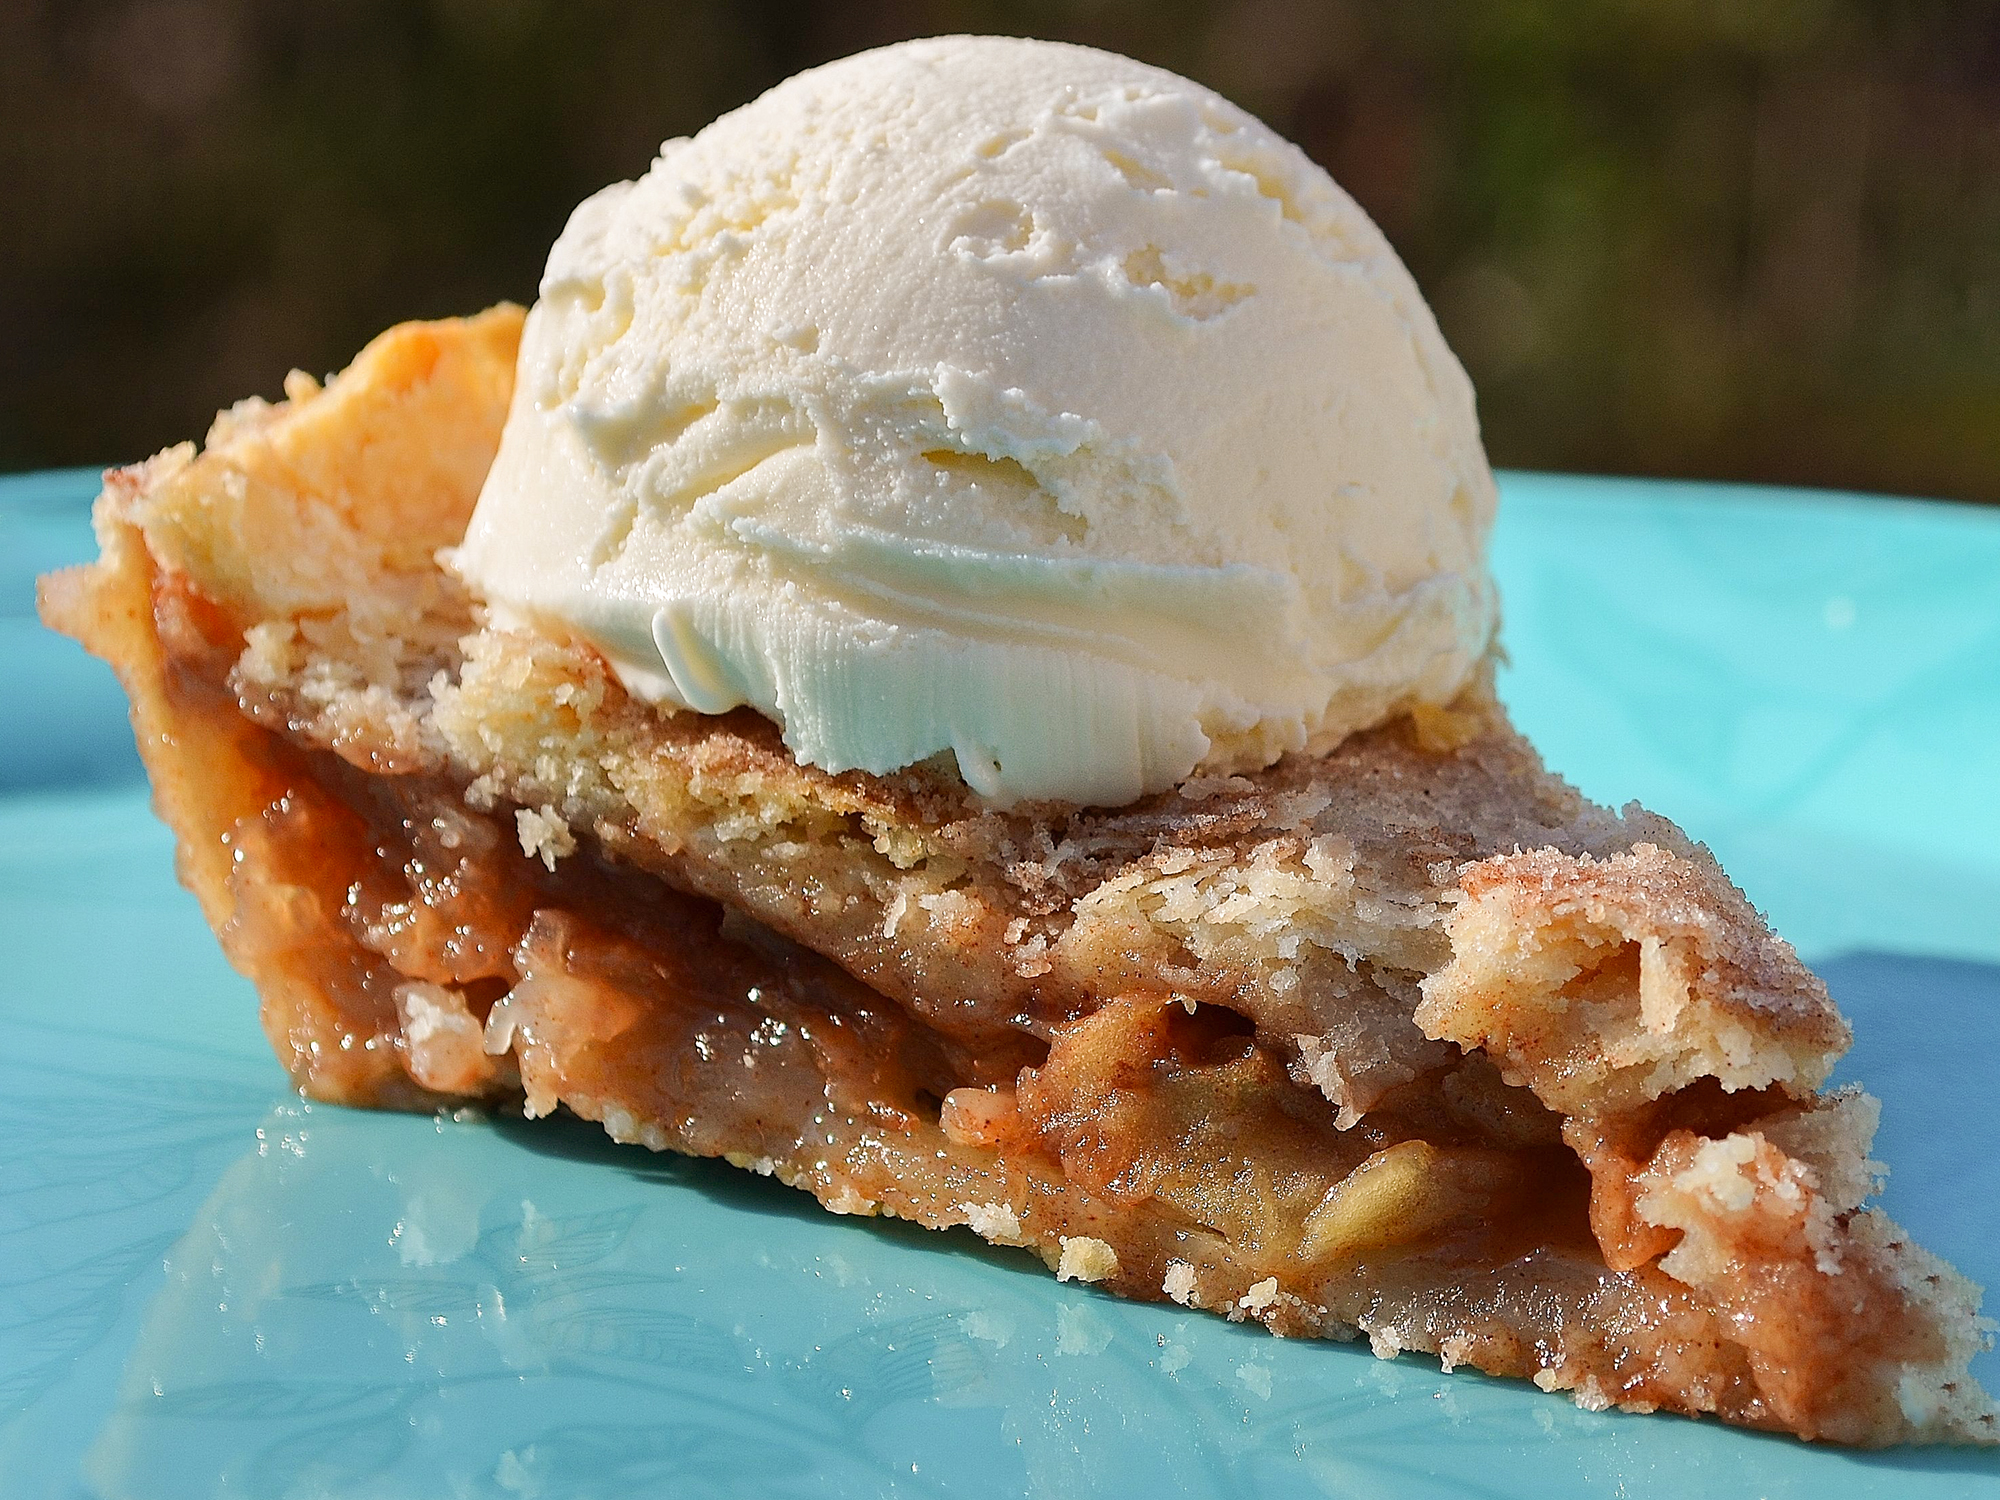 close up view of a slice of Apple Pie with a scoop of vanilla ice cream on top, on a blue plate